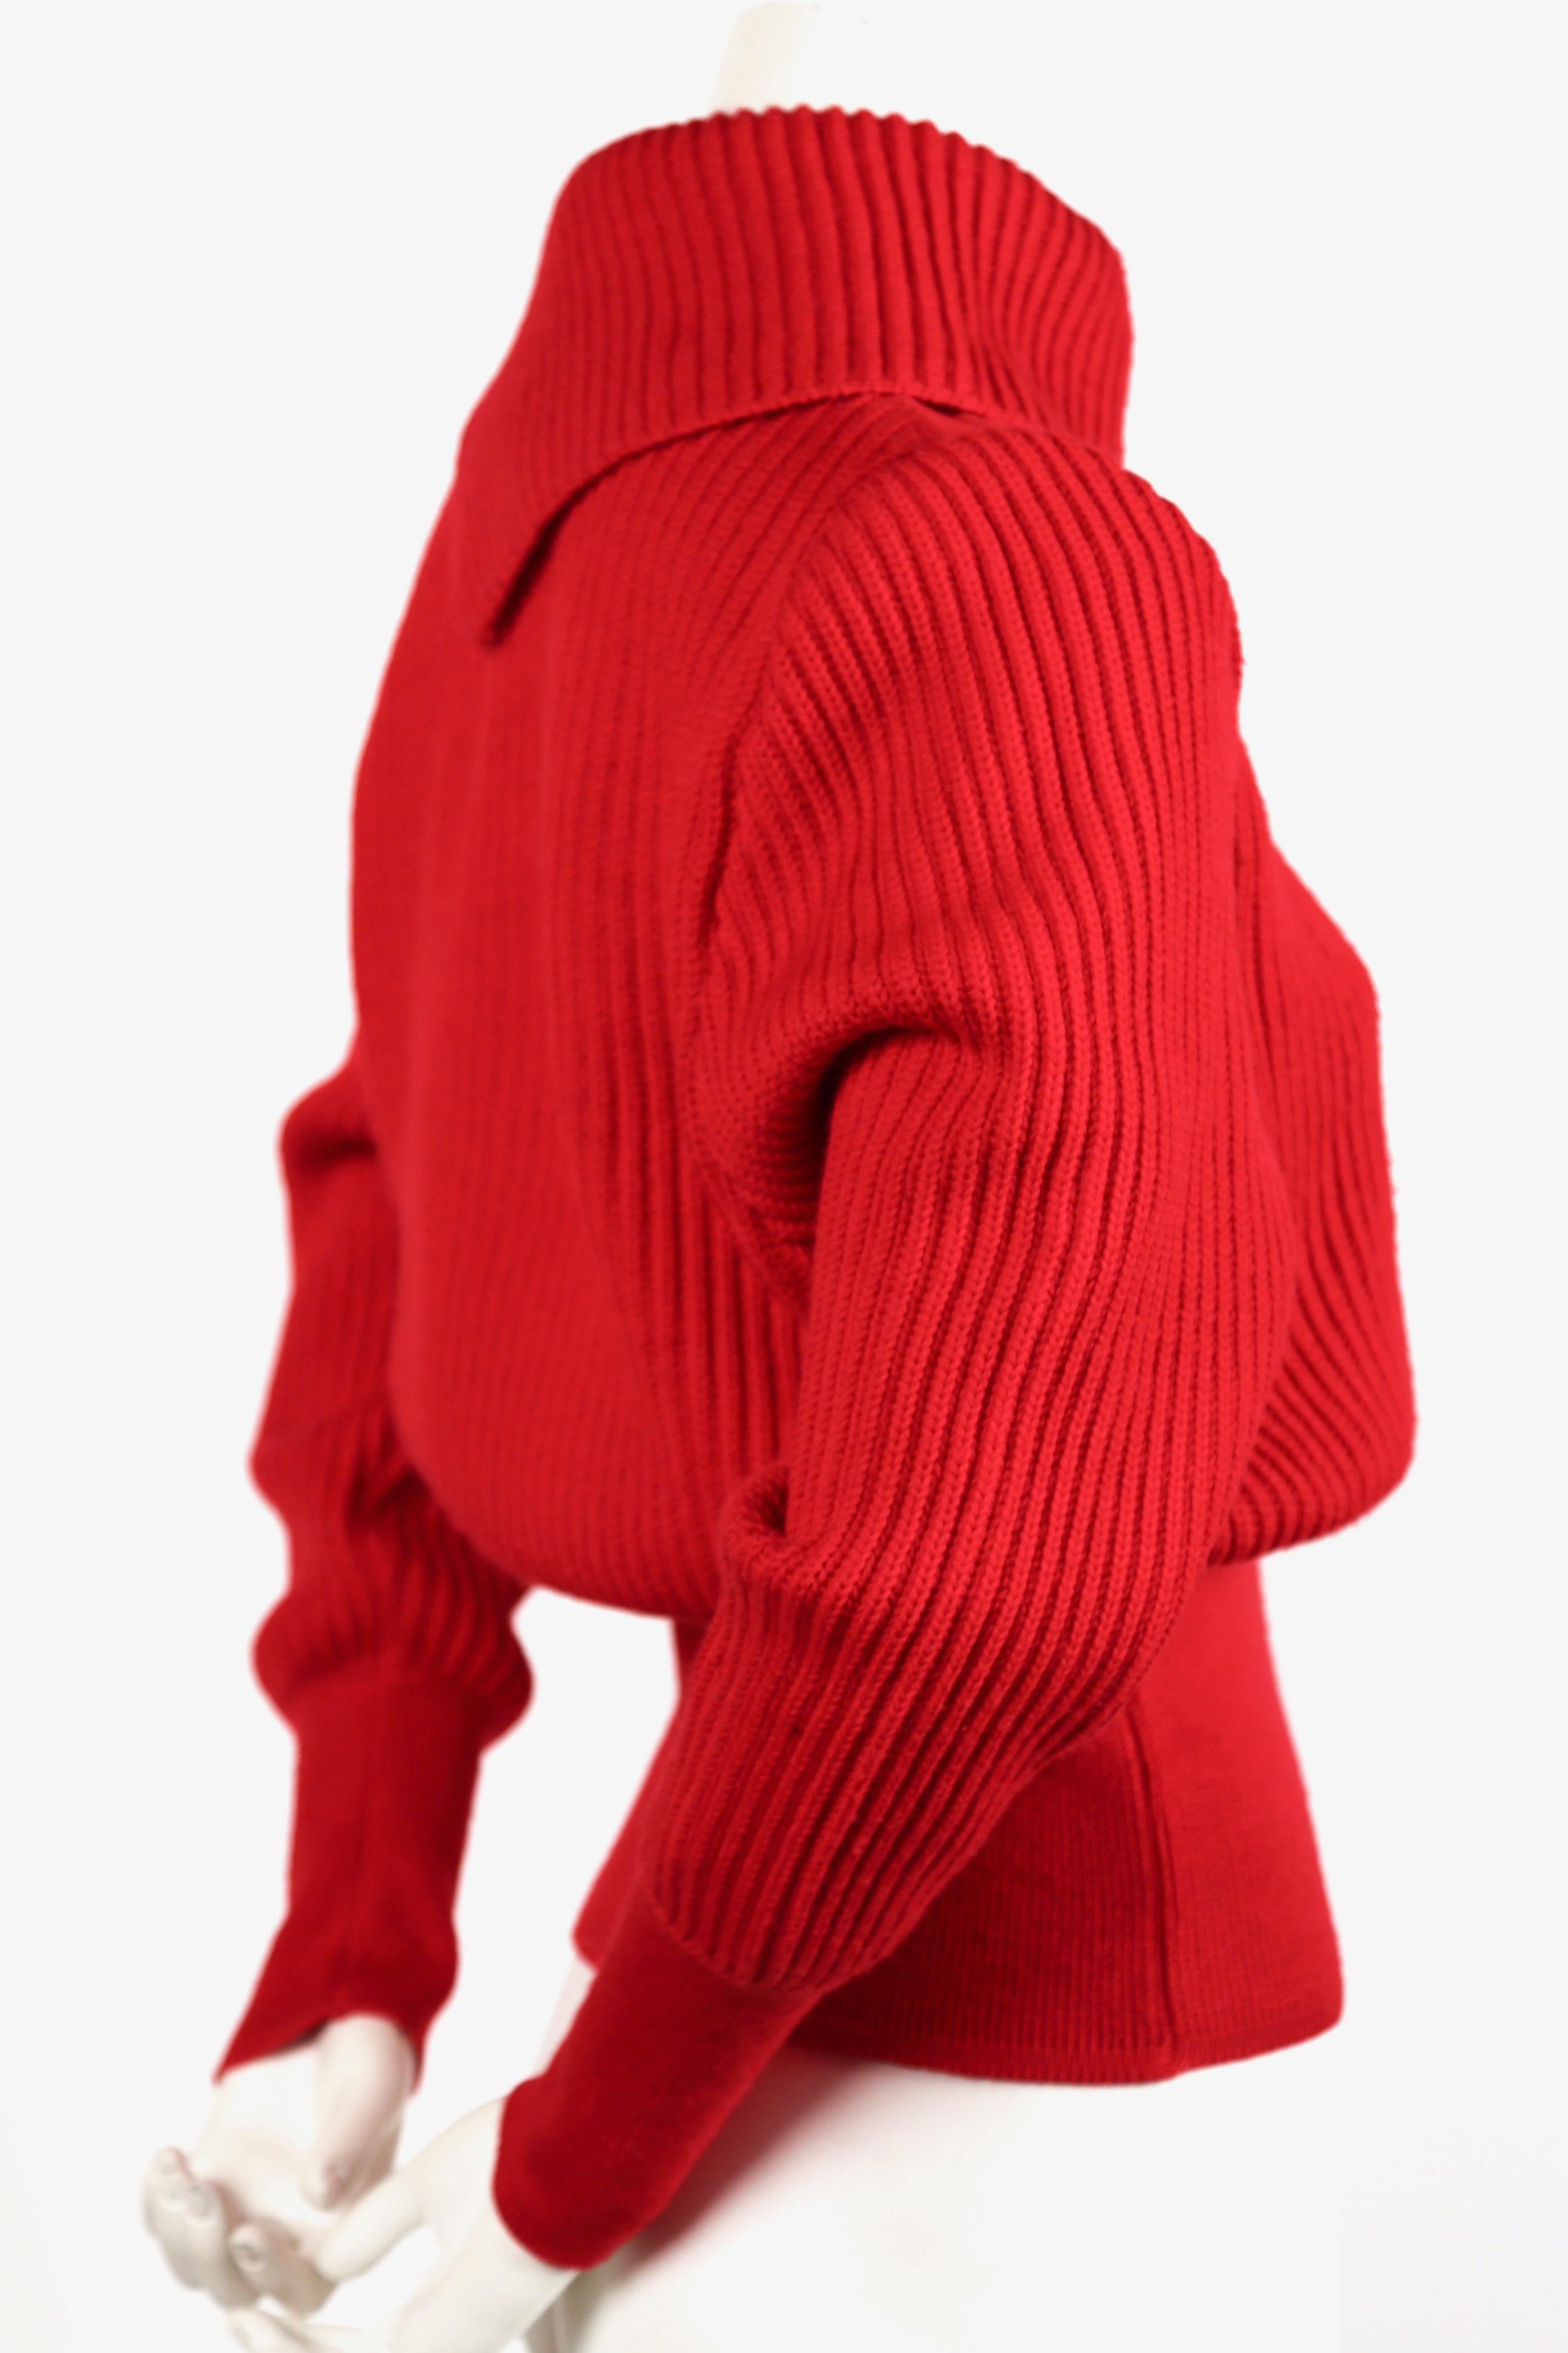 Red wool sweater with silver metal hooks designed by Azzedine Alaia dating to the late 1990's. Size 'S'. Approximate measurements: shoulder 15